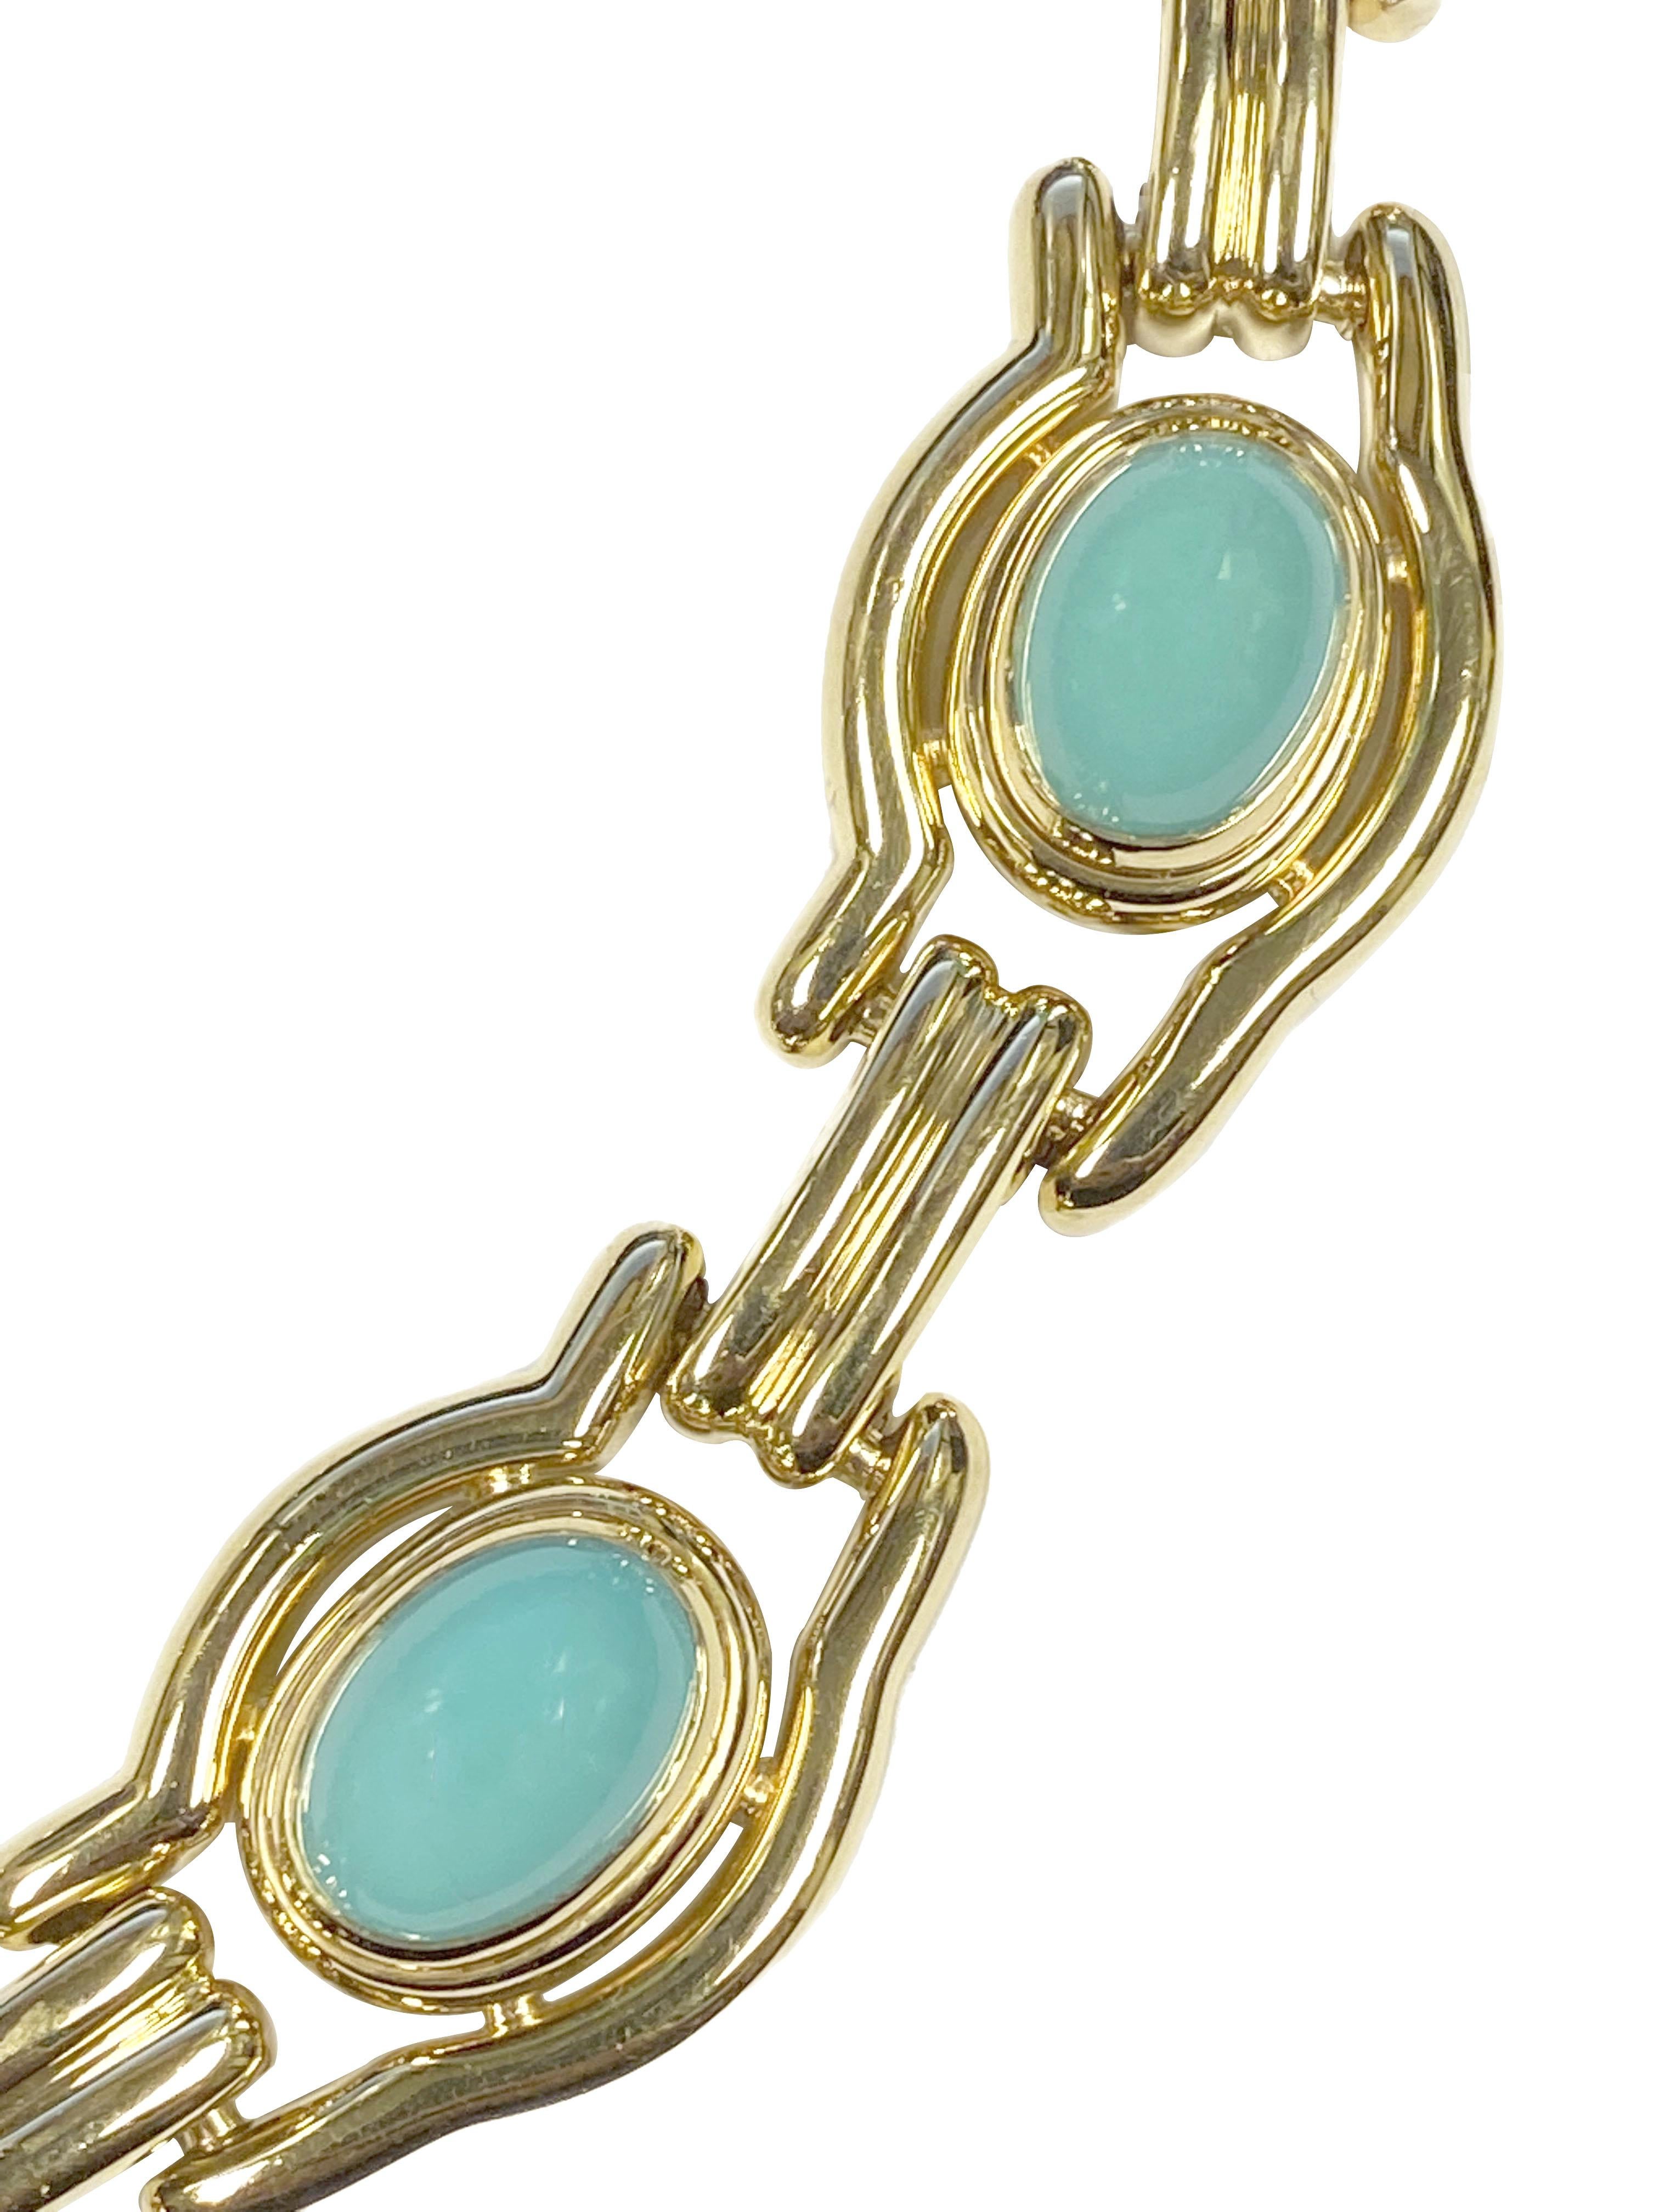 Circa 1990 David Webb 18K Yellow Gold Necklace measuring 16 inches in length and 3/4 inch wide, each 1 1/4 inch section is bezel set with a Fine color Persian Turquoise measuring from 14 X 10 M.M. to 10 X 9 M.M. nice solid construction and weighing